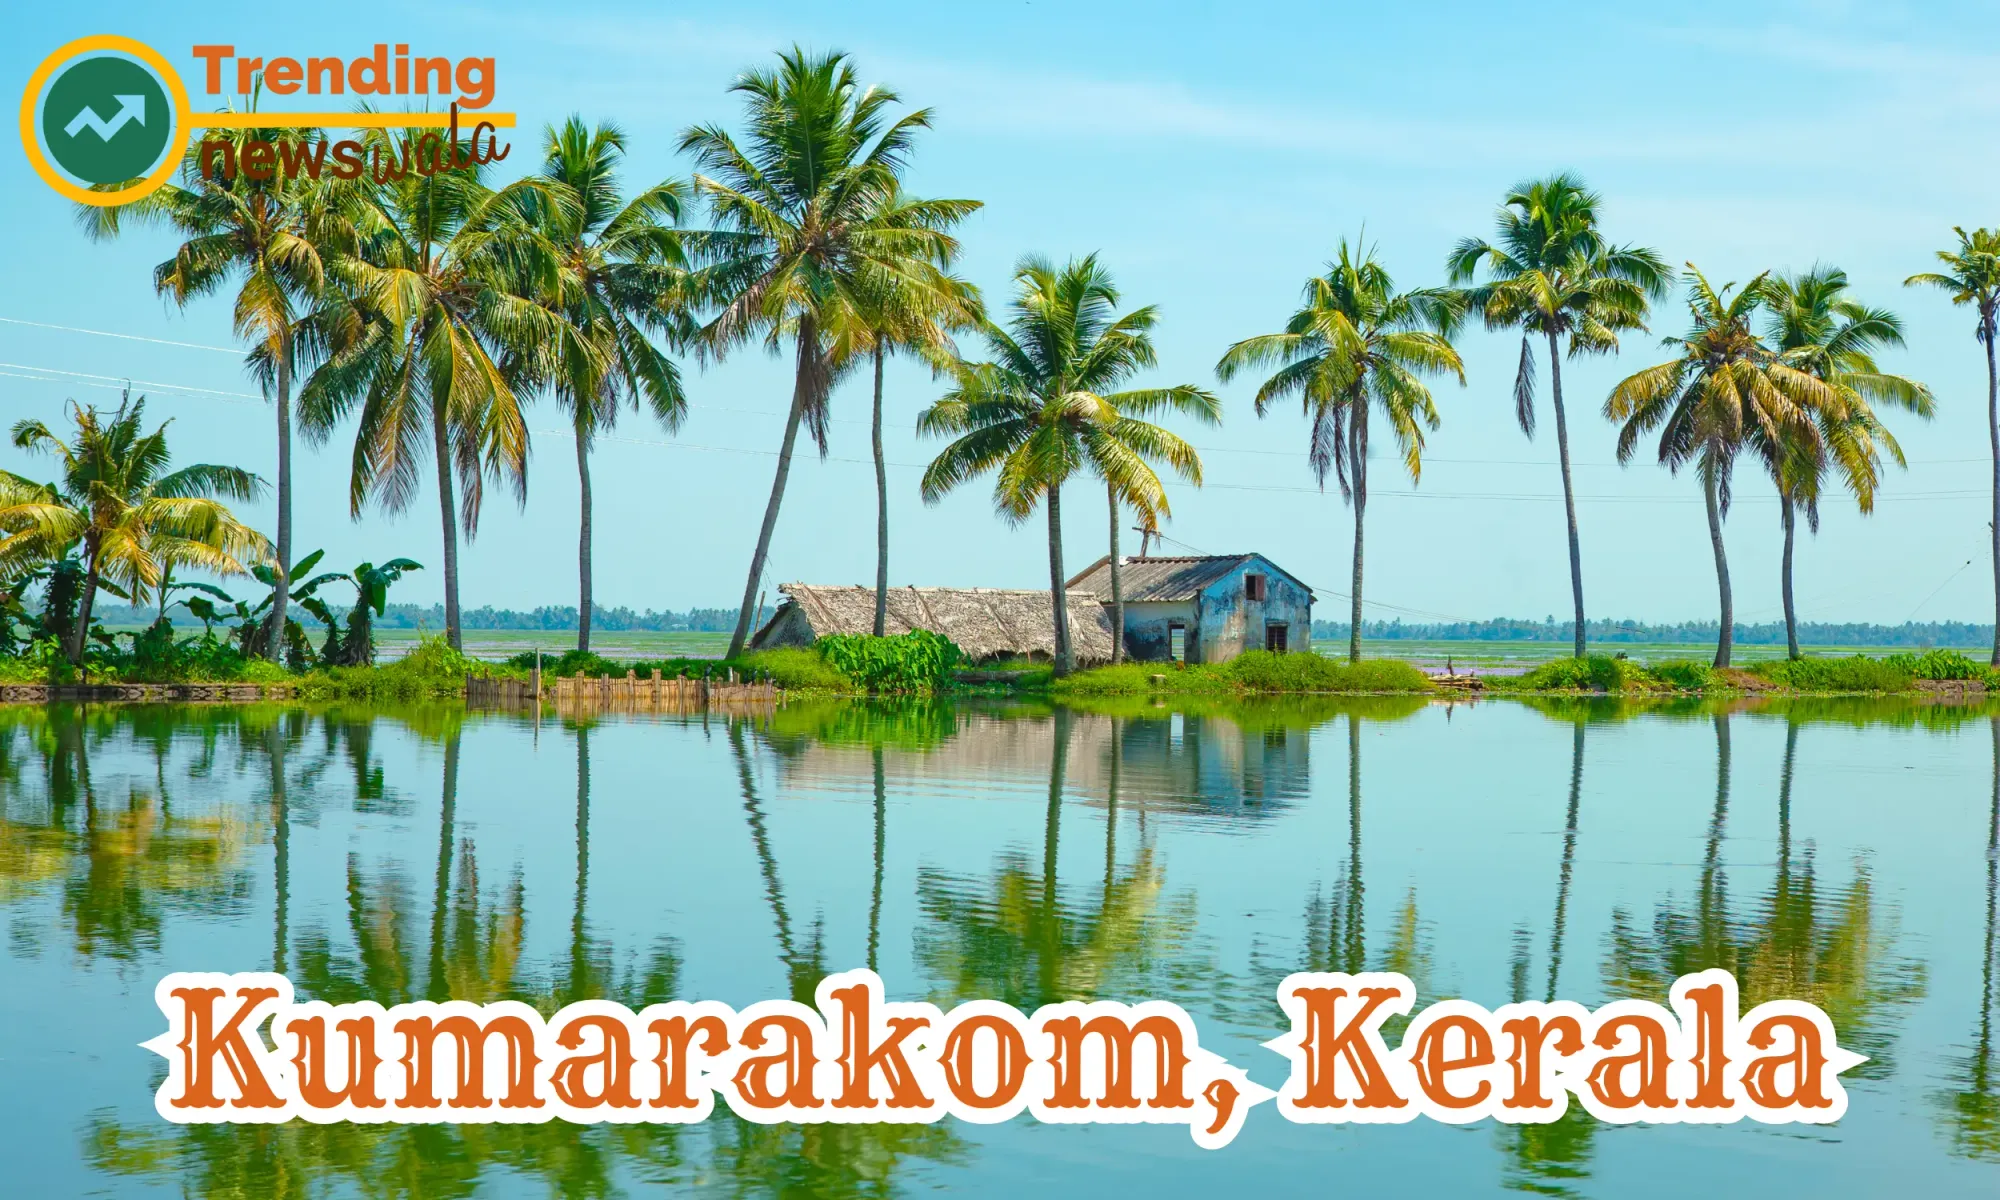 Kumarakom is a scenic village located in the Kottayam district of Kerala, India